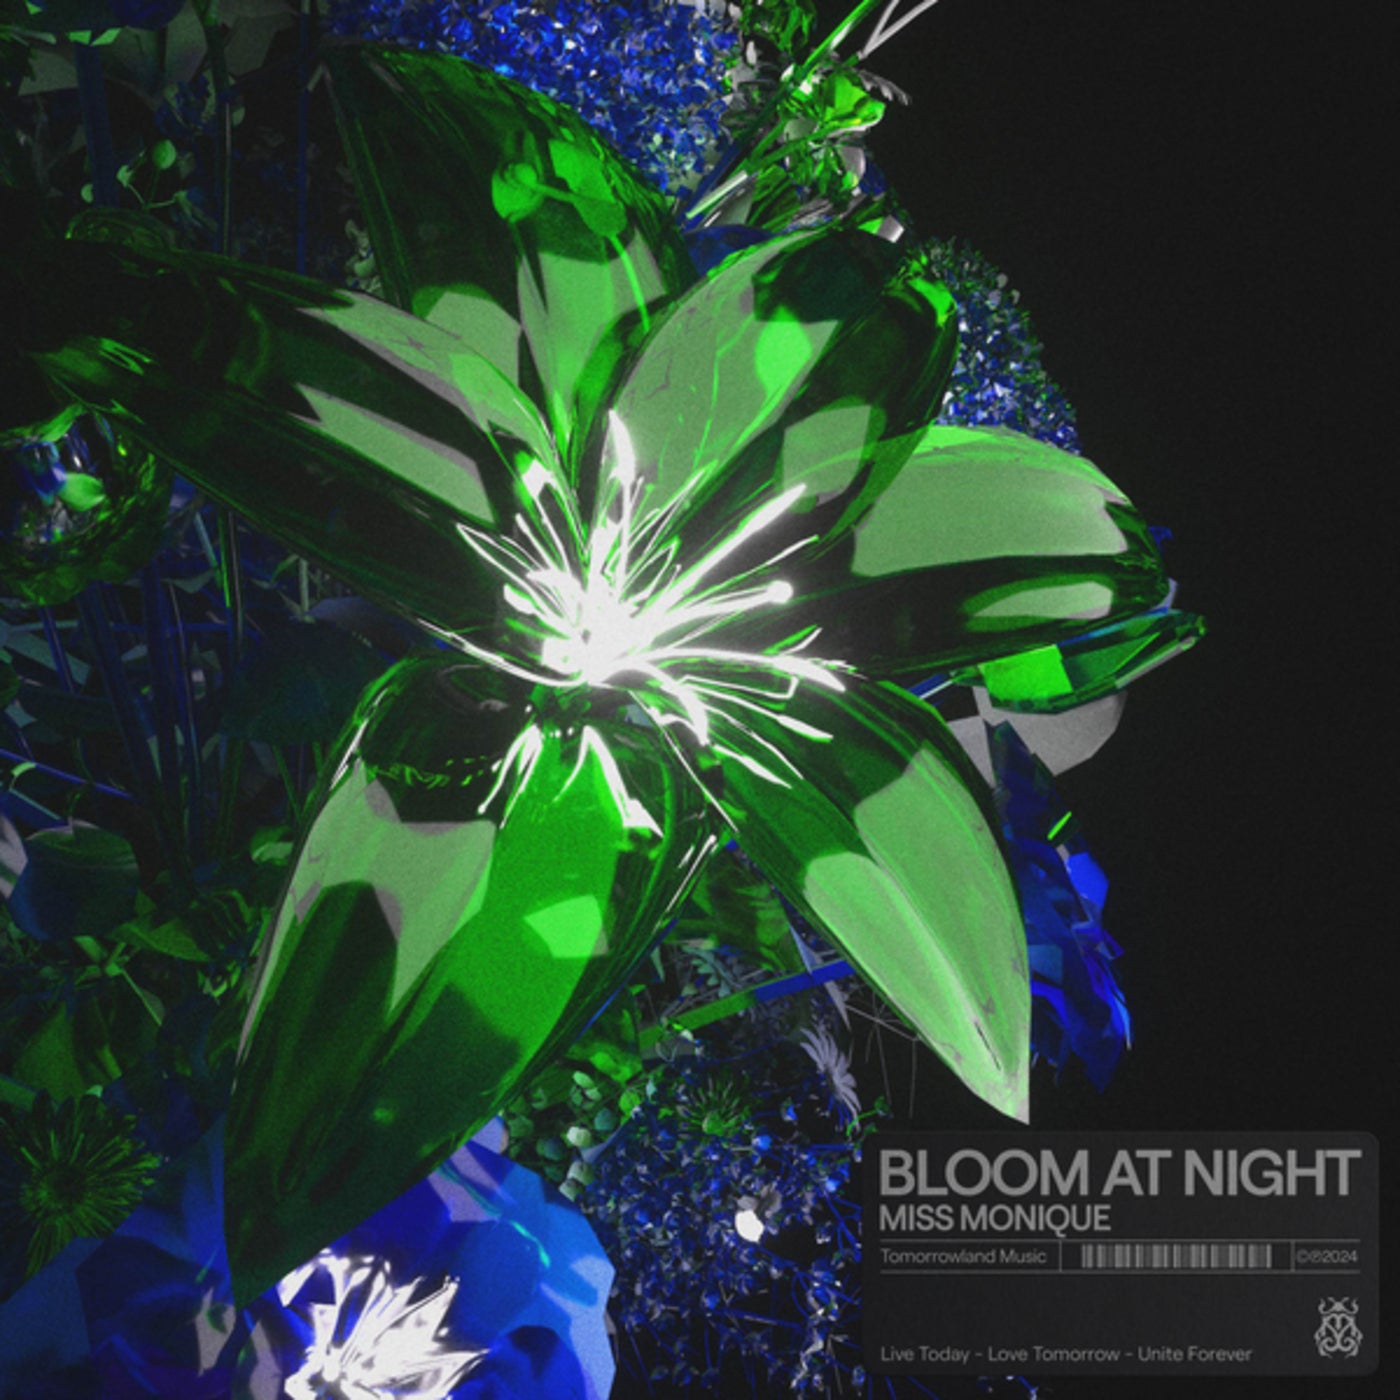 image cover: Miss Monique - Bloom At Night (Extended Mix) on Tomorrowland Music